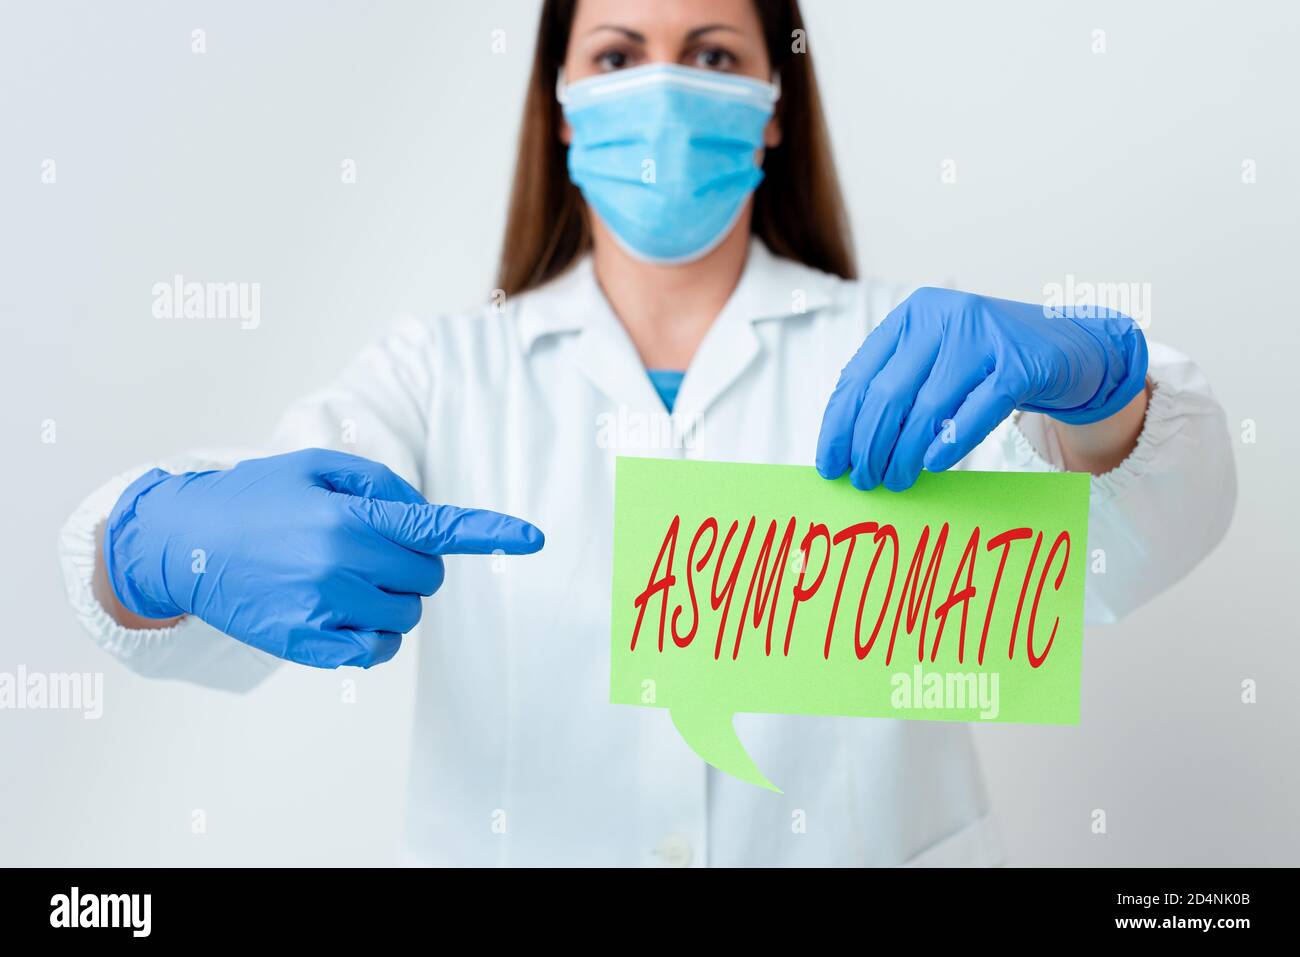 Text sign showing Asymptomatic. Business photo text a condition or an individual producing or showing no symptoms Laboratory technician featuring empt Stock Photo